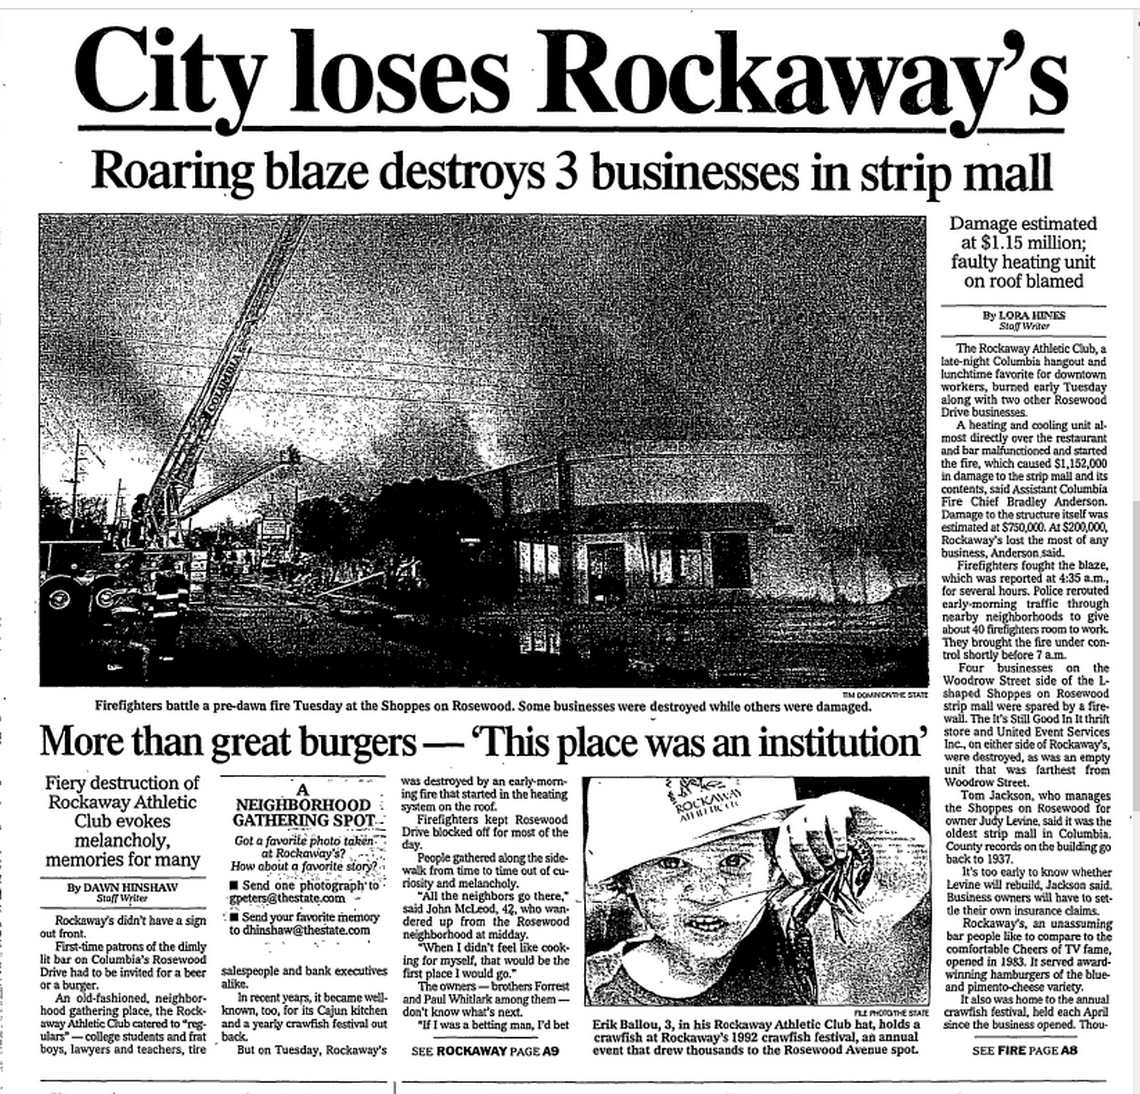 A story in The State details the fire that destroyed the original Rockaway Athletic Club restaurant building back in 2002.